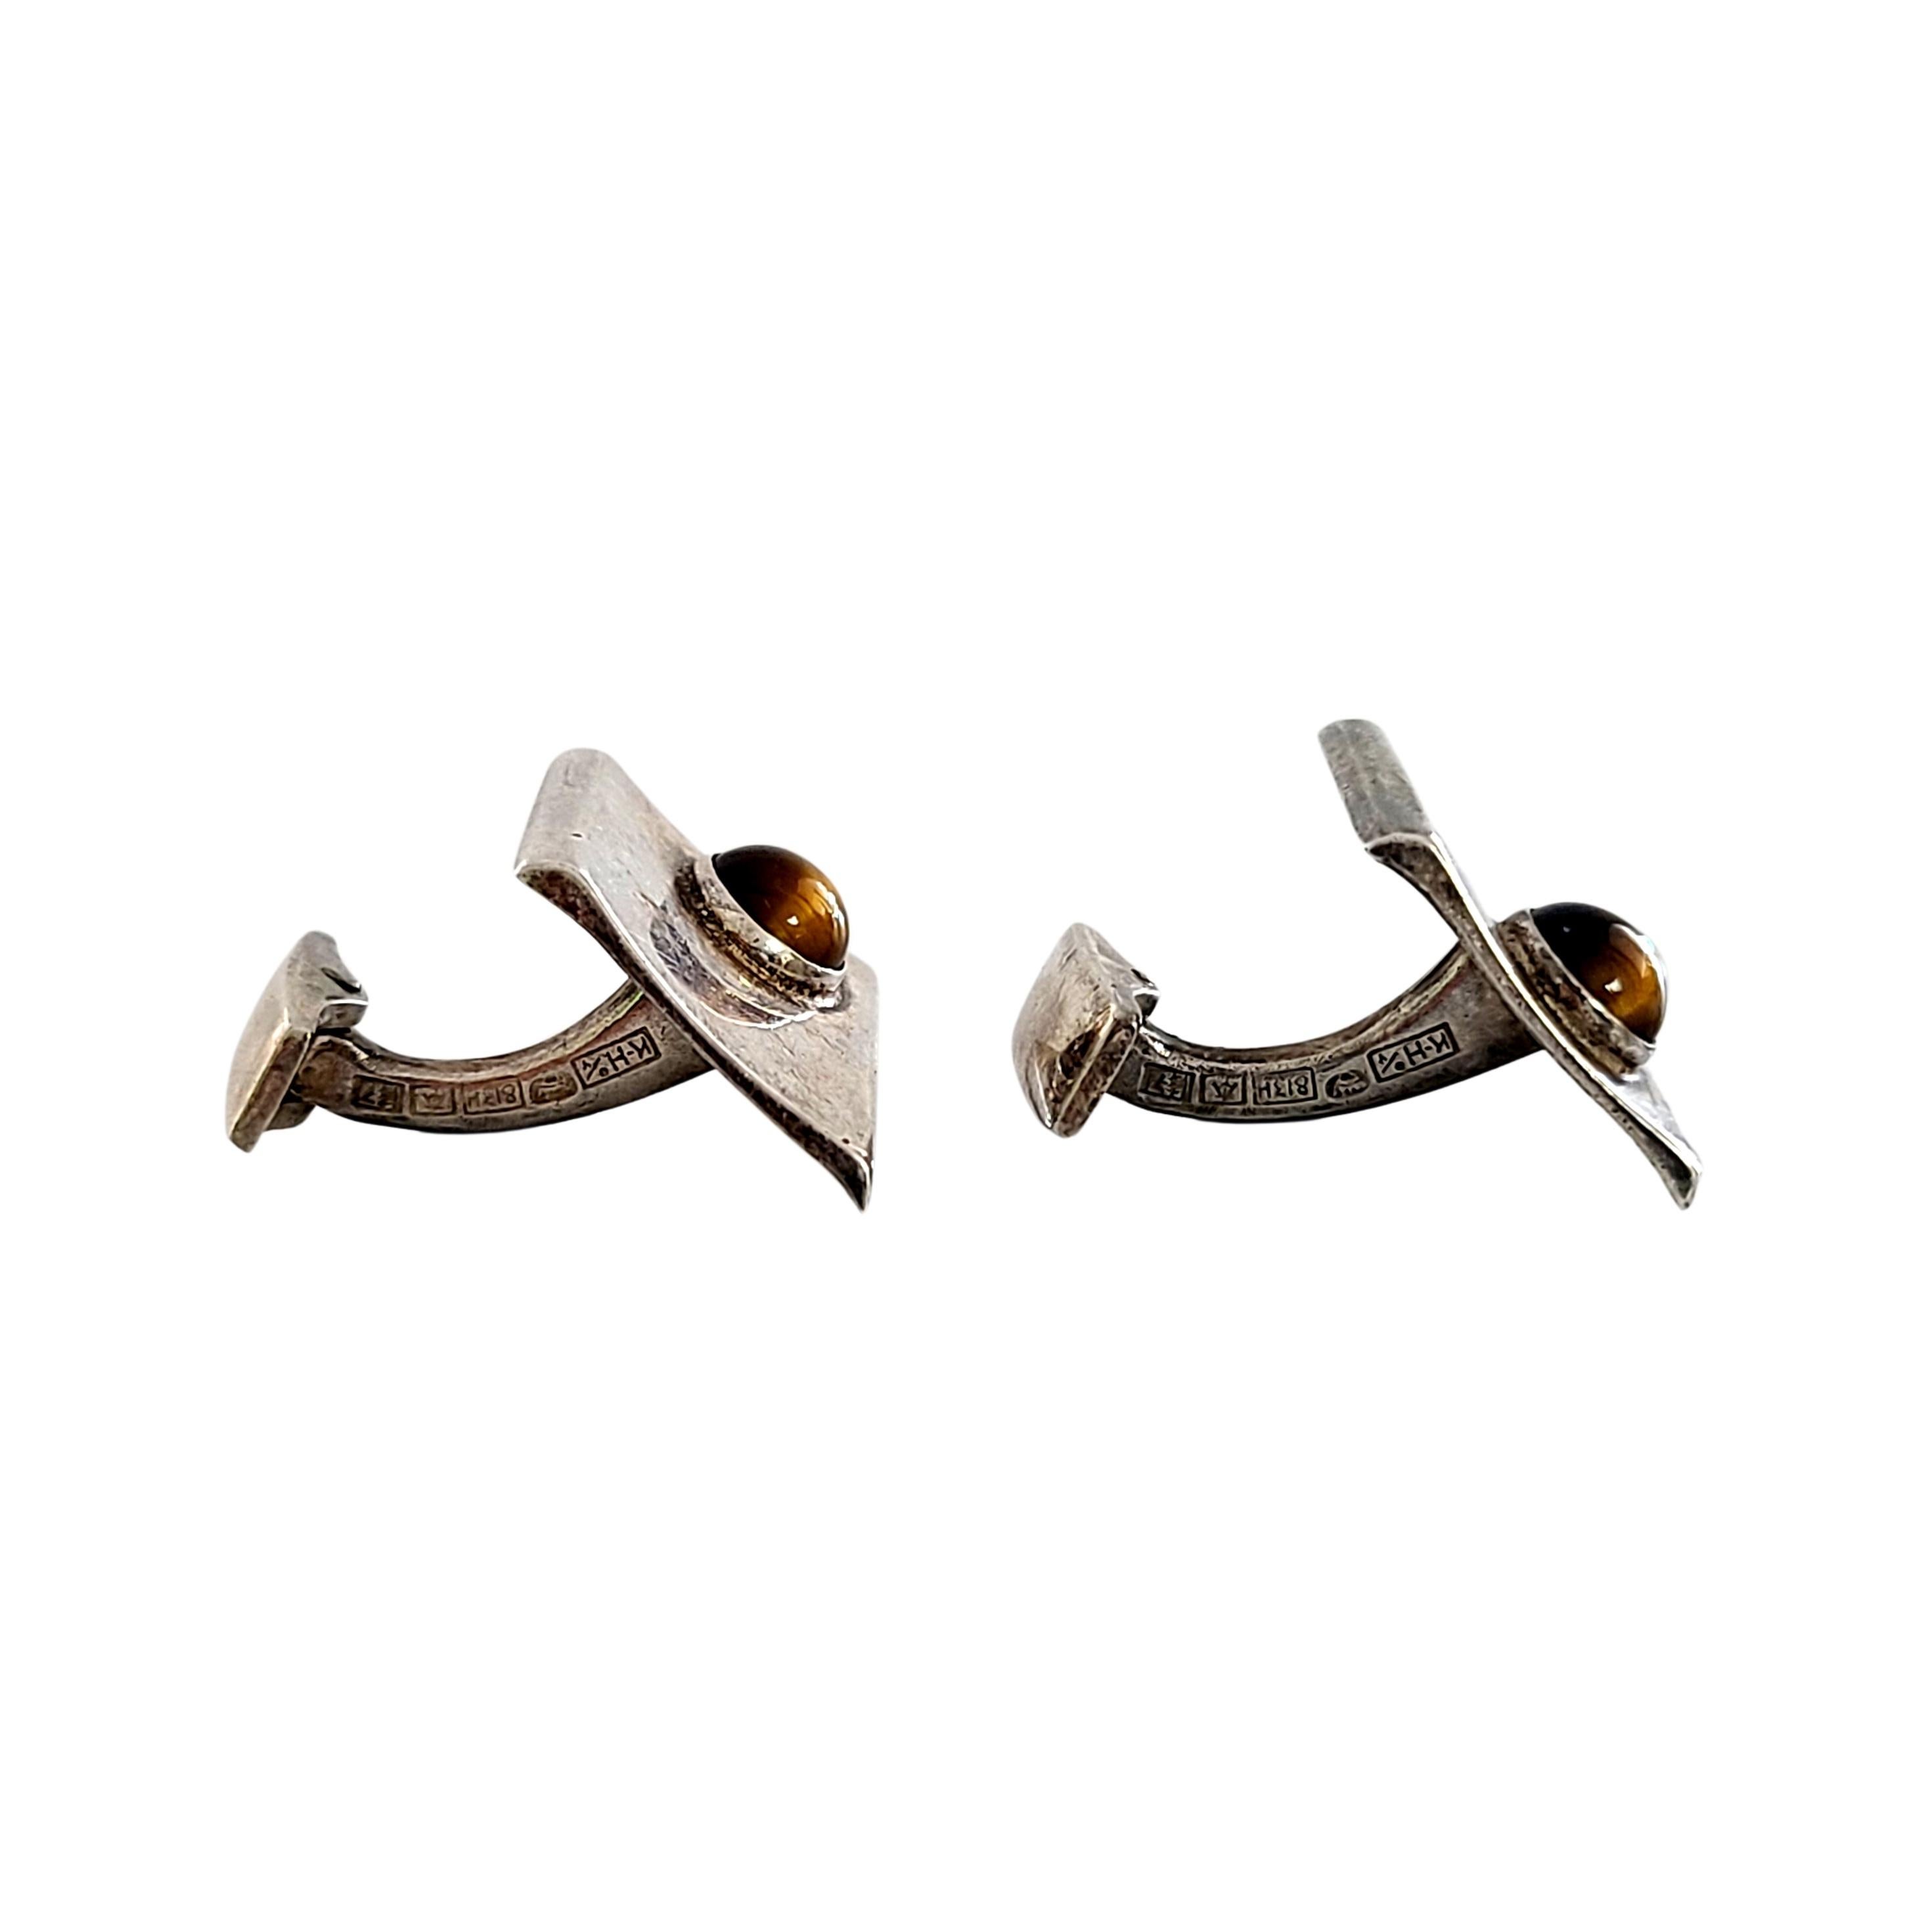 Vintage 813 silver and tiger's eye cuff links, circa 1961.

Unique piece of modern design in .813 fine silver by a designer of Finland.

Cuff links measures approx 7/8